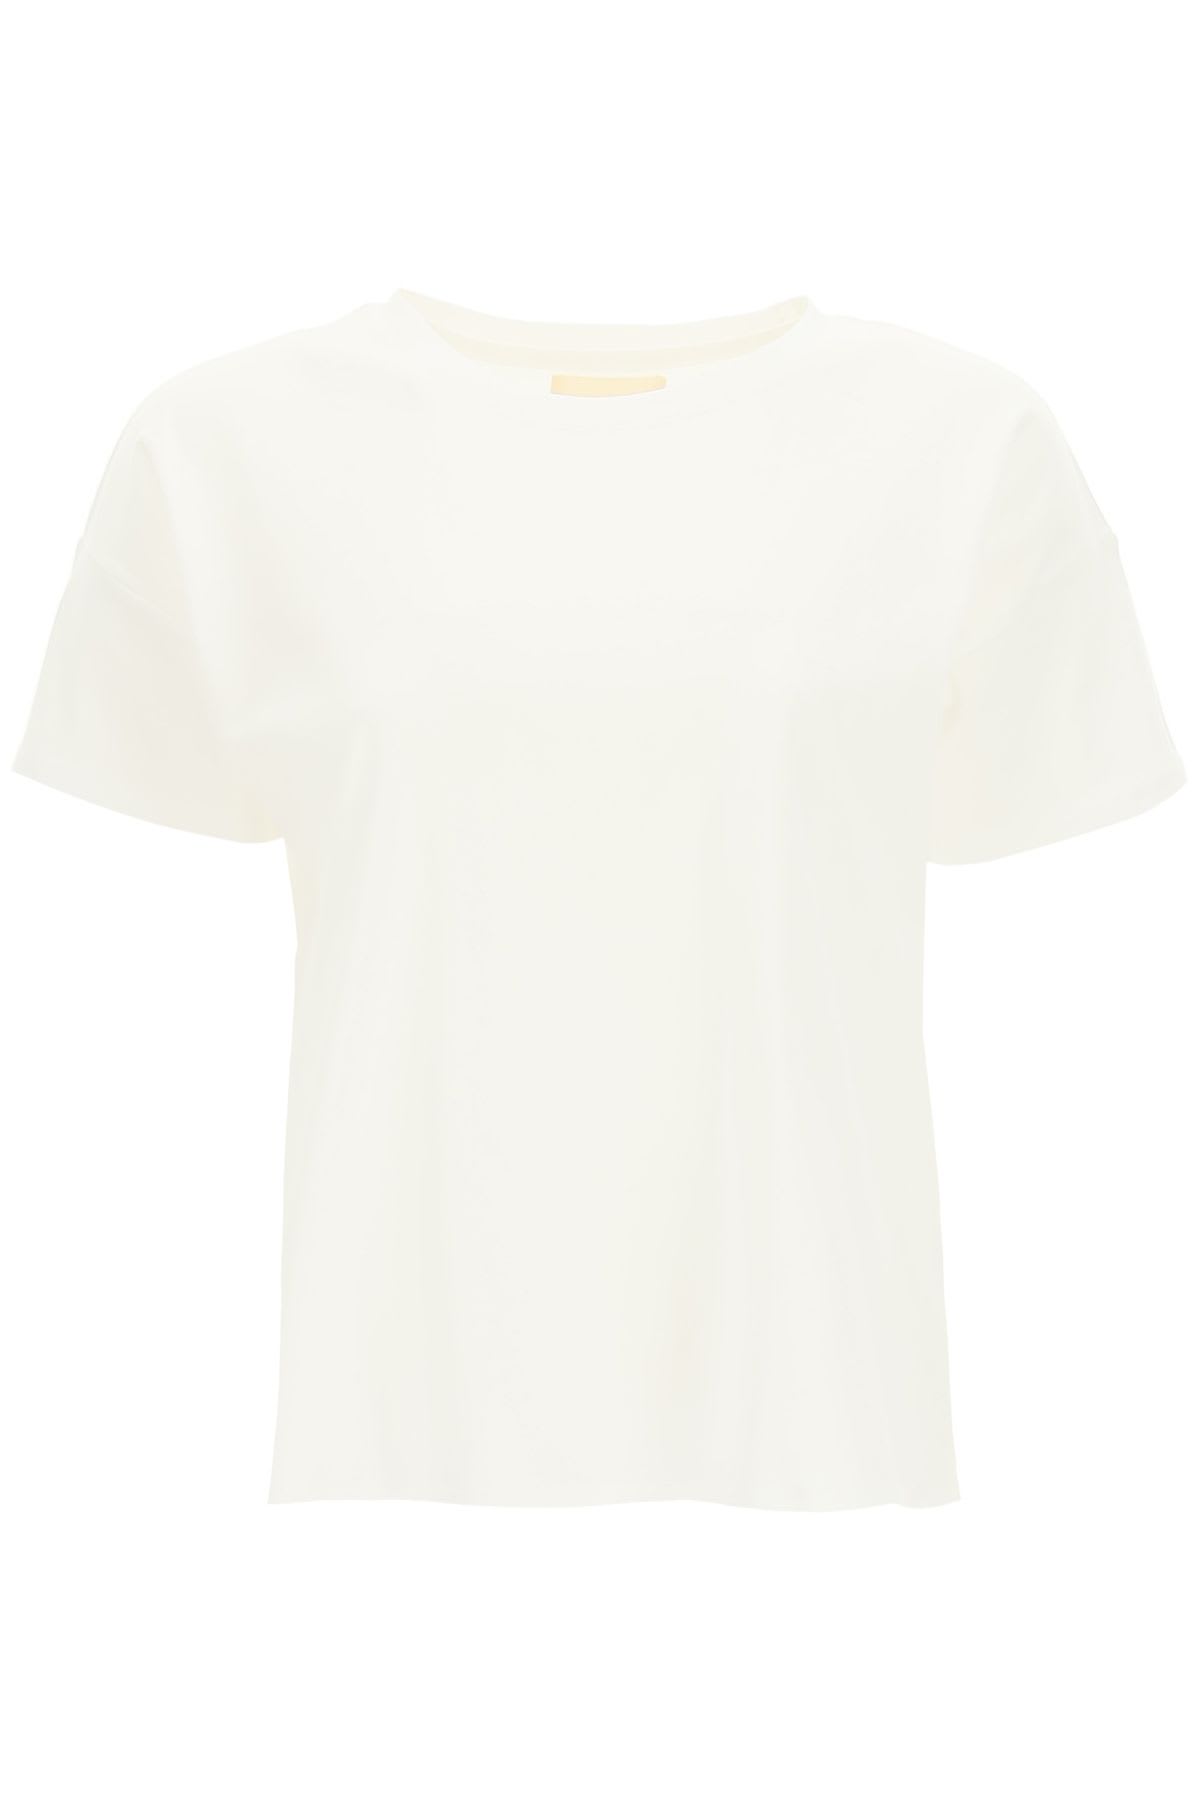 Loulou Studio Basic T-shirt With Logo Embroidery